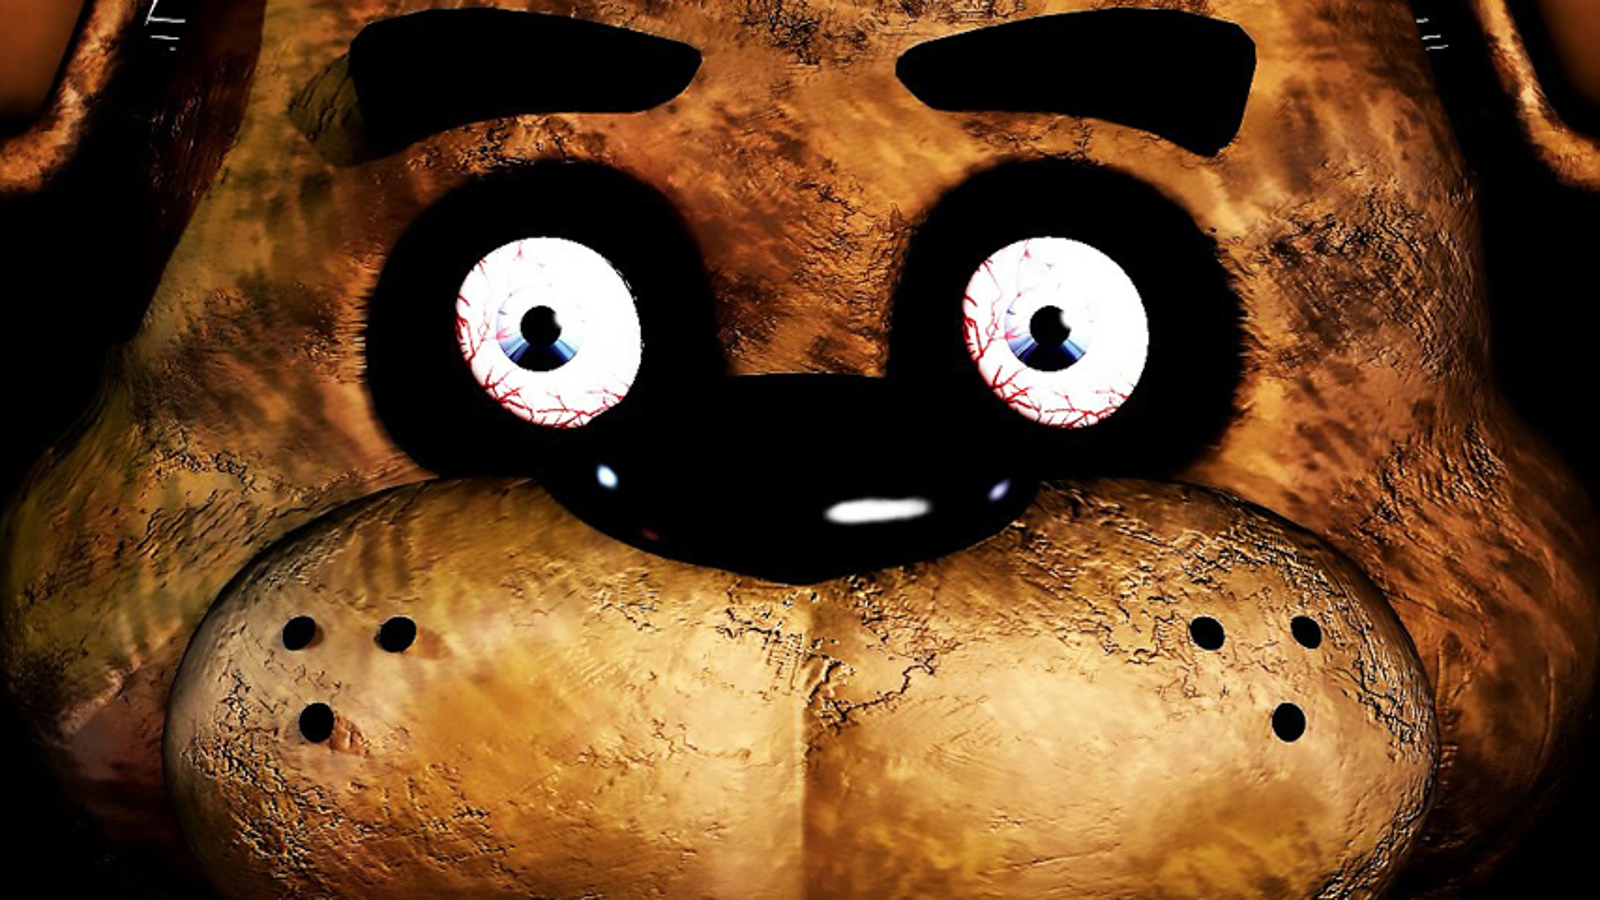 REVIEW: FIVE NIGHTS AT FREDDY'S 3